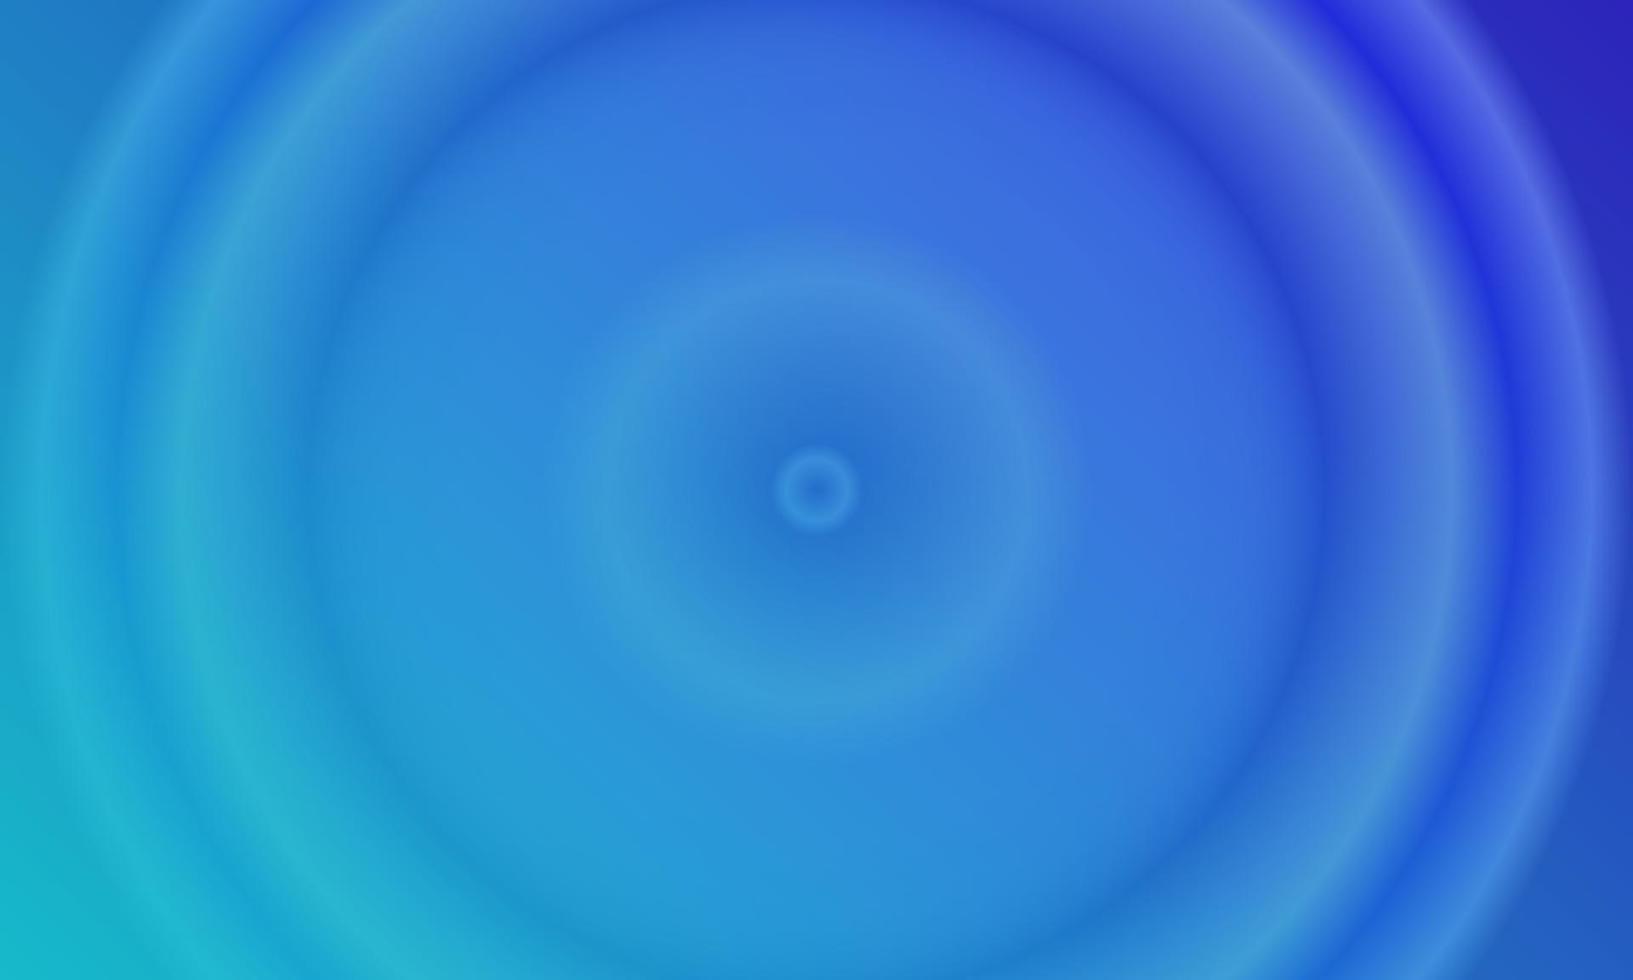 dark blue and pastel blue circle radial gradient abstract background. simple, blur, shiny, modern and color style. use for homepage, backgdrop, wallpaper, poster, banner or flyer vector